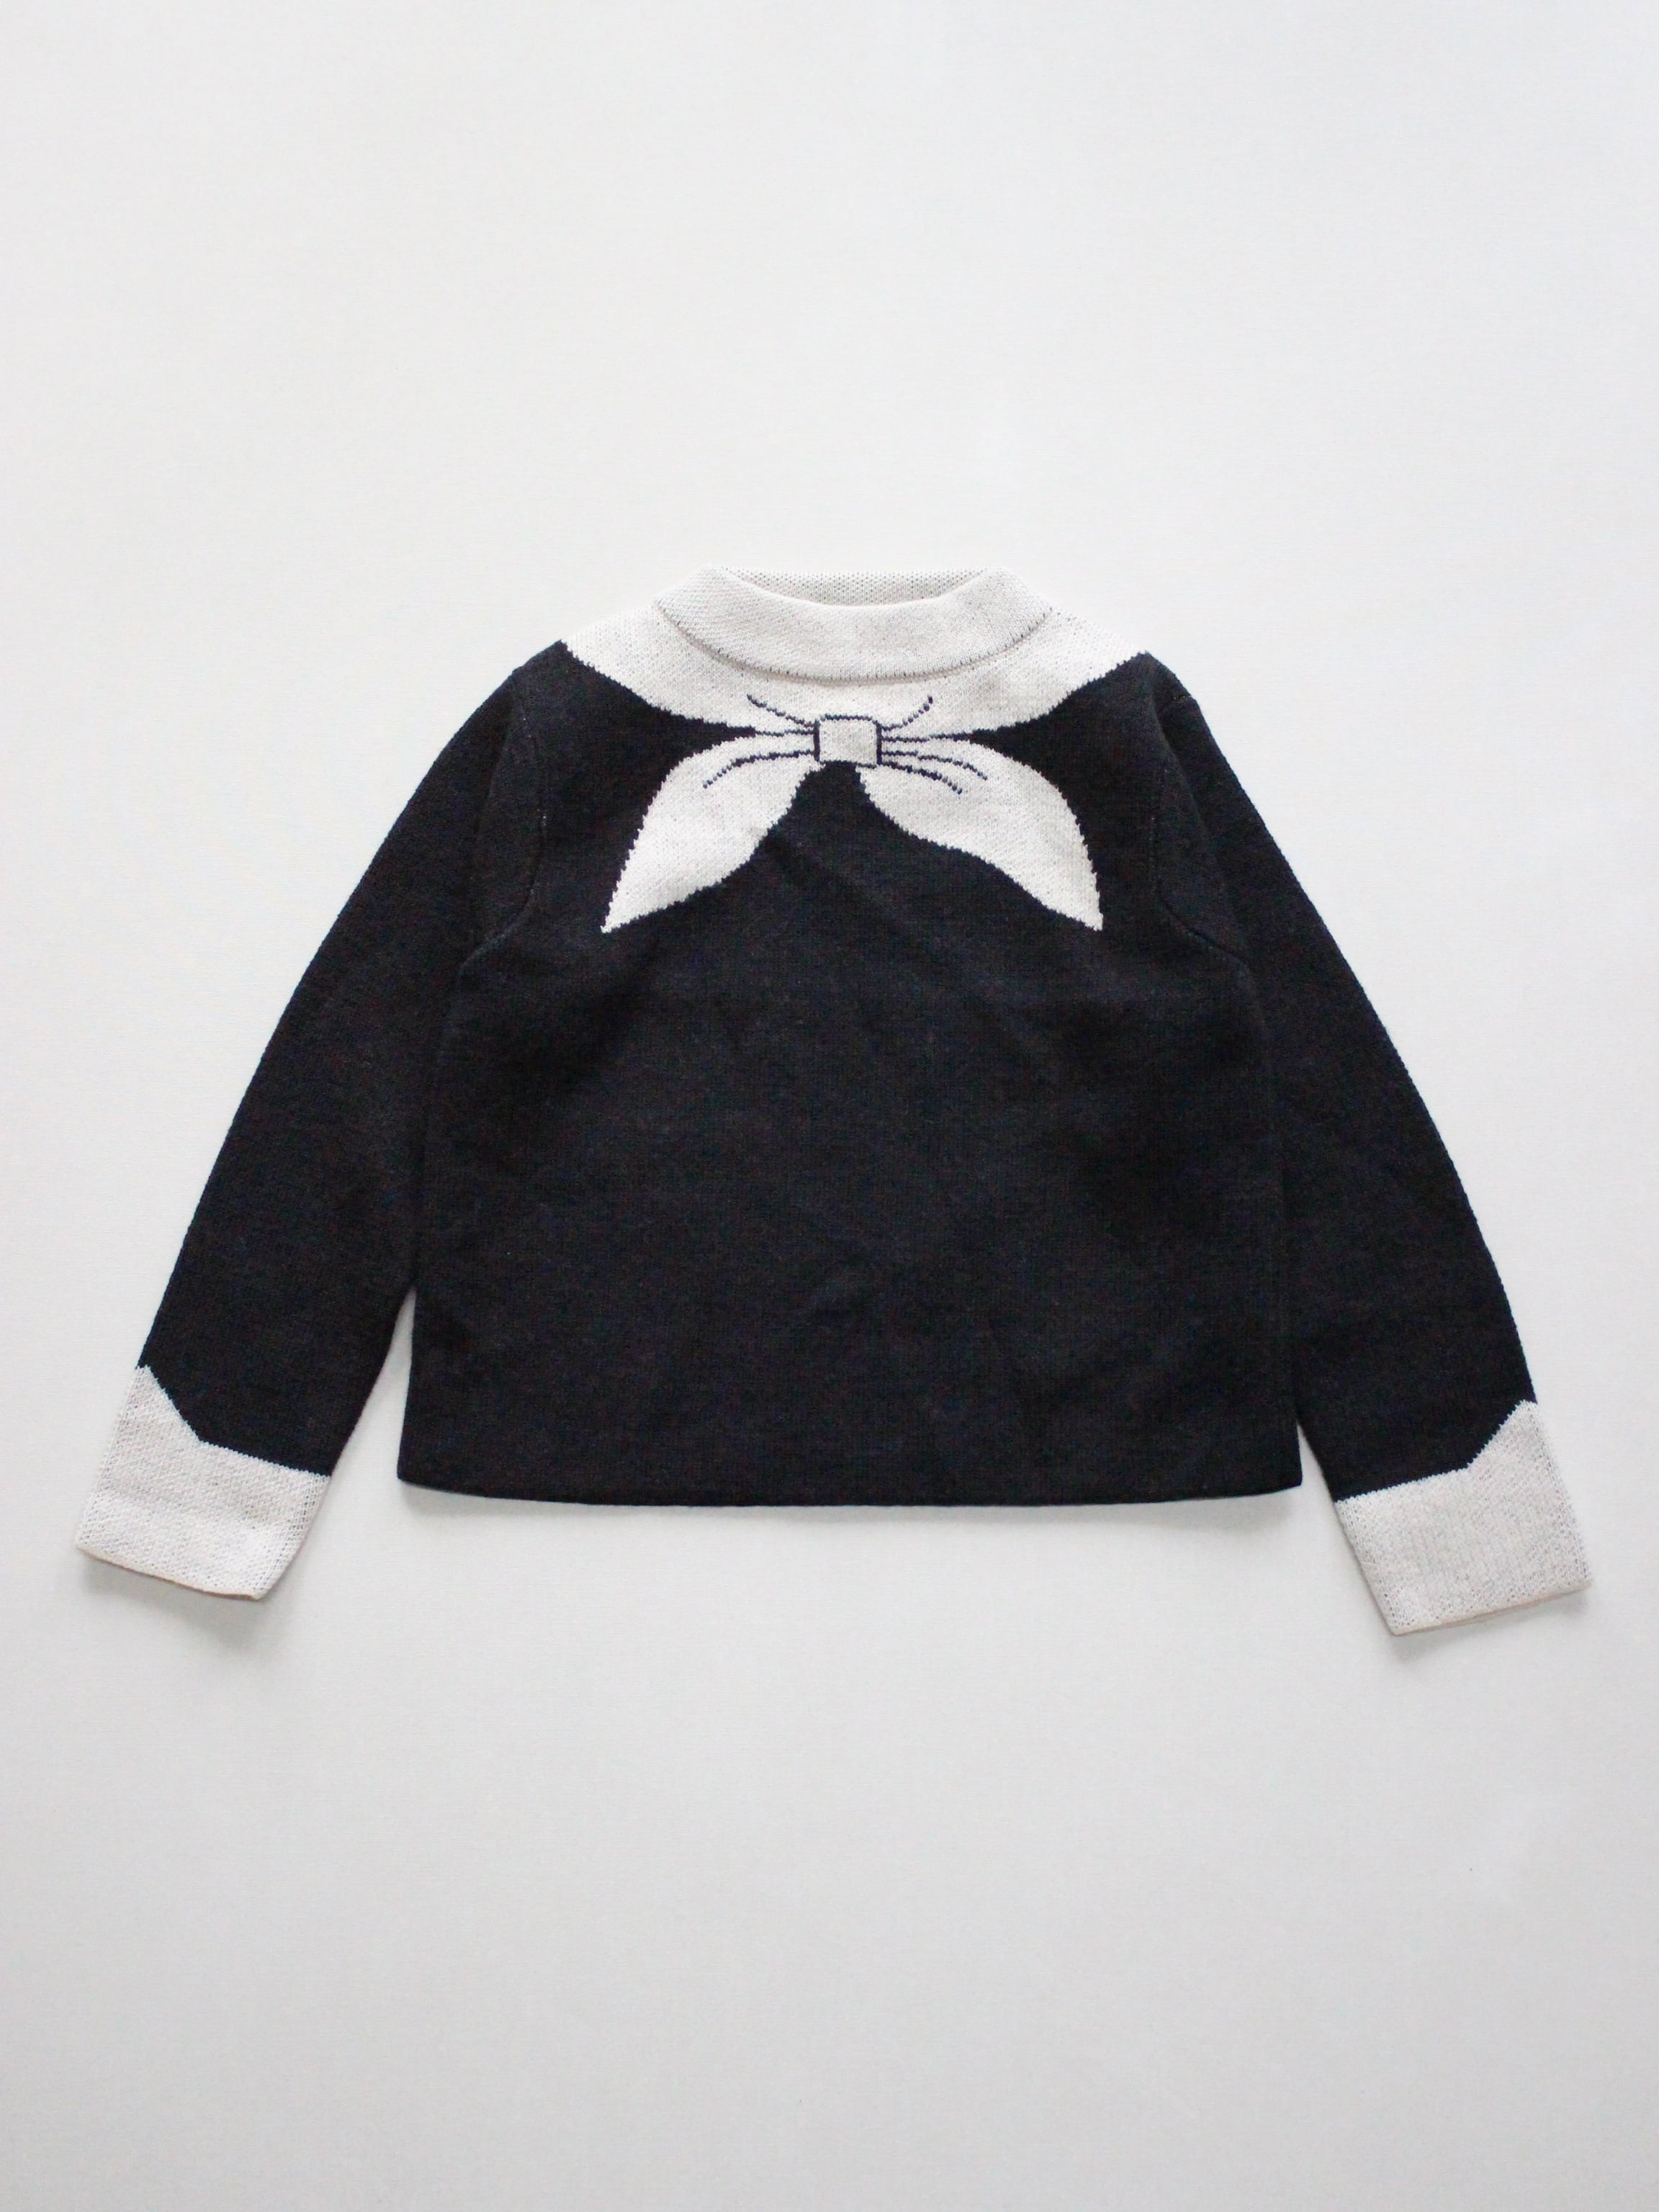 misha and puff licorice scout top